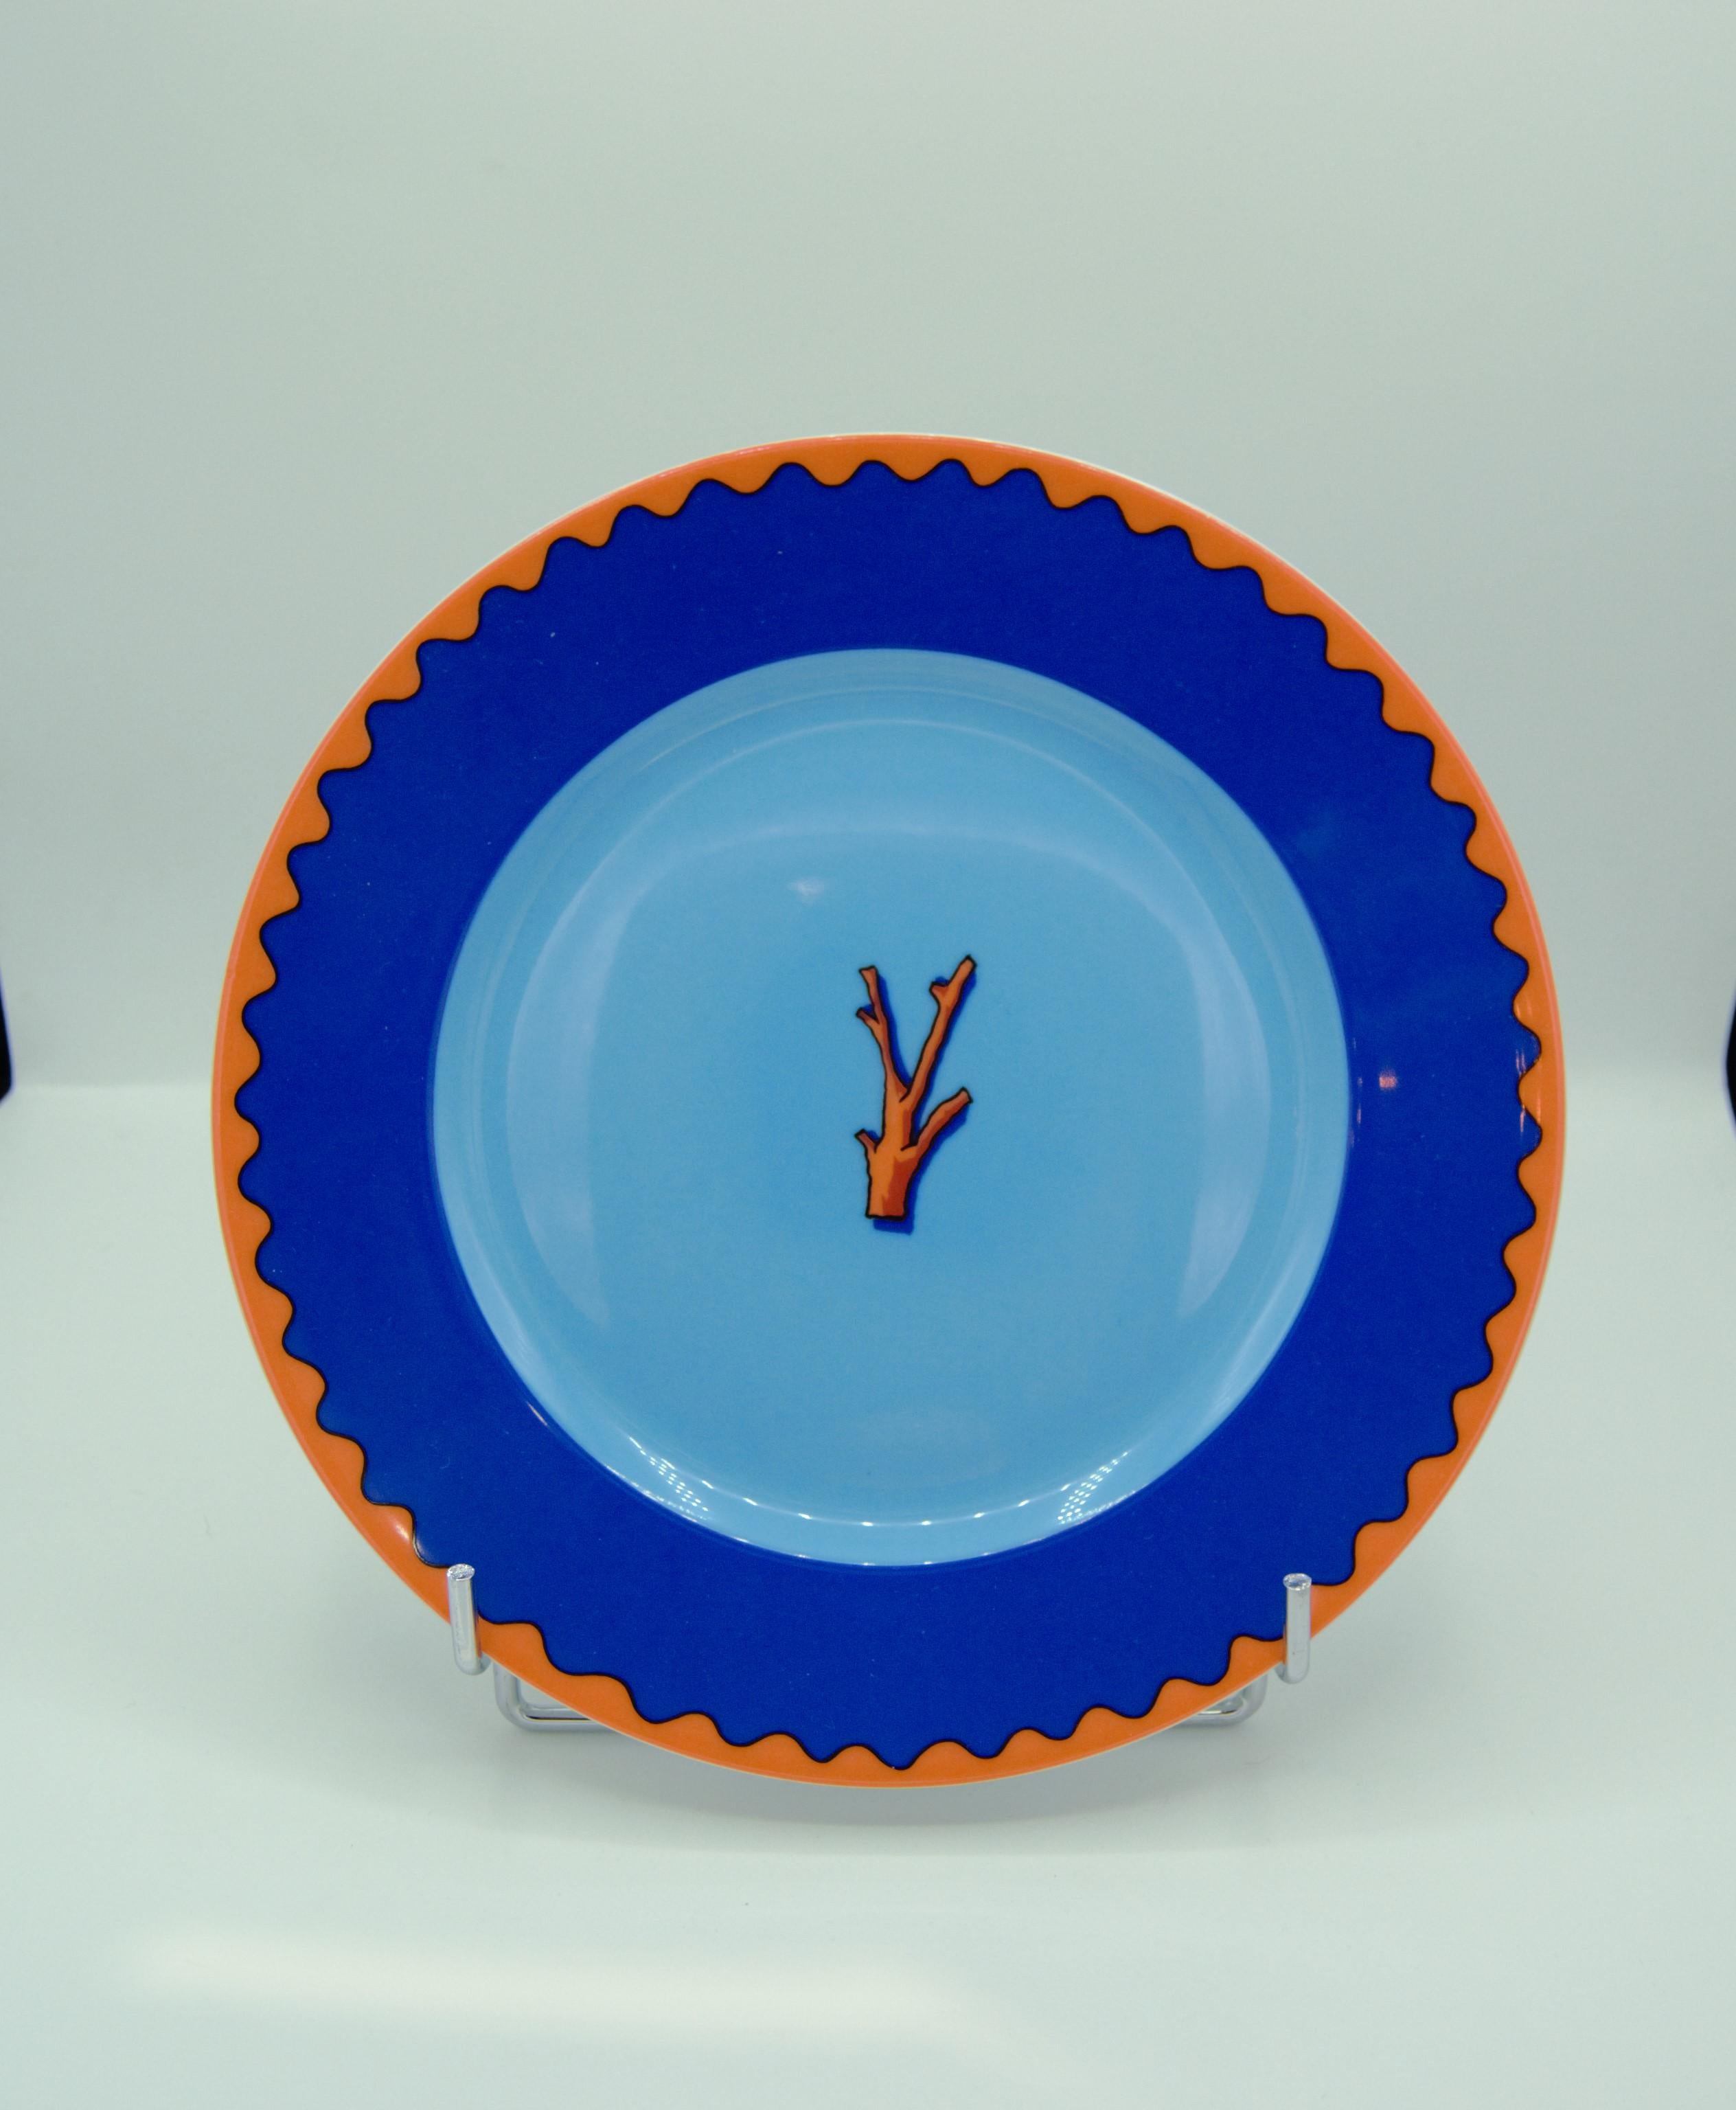 French Garouste and Bonetti, Daum/Limoges, 1 plate, 1989 For Sale